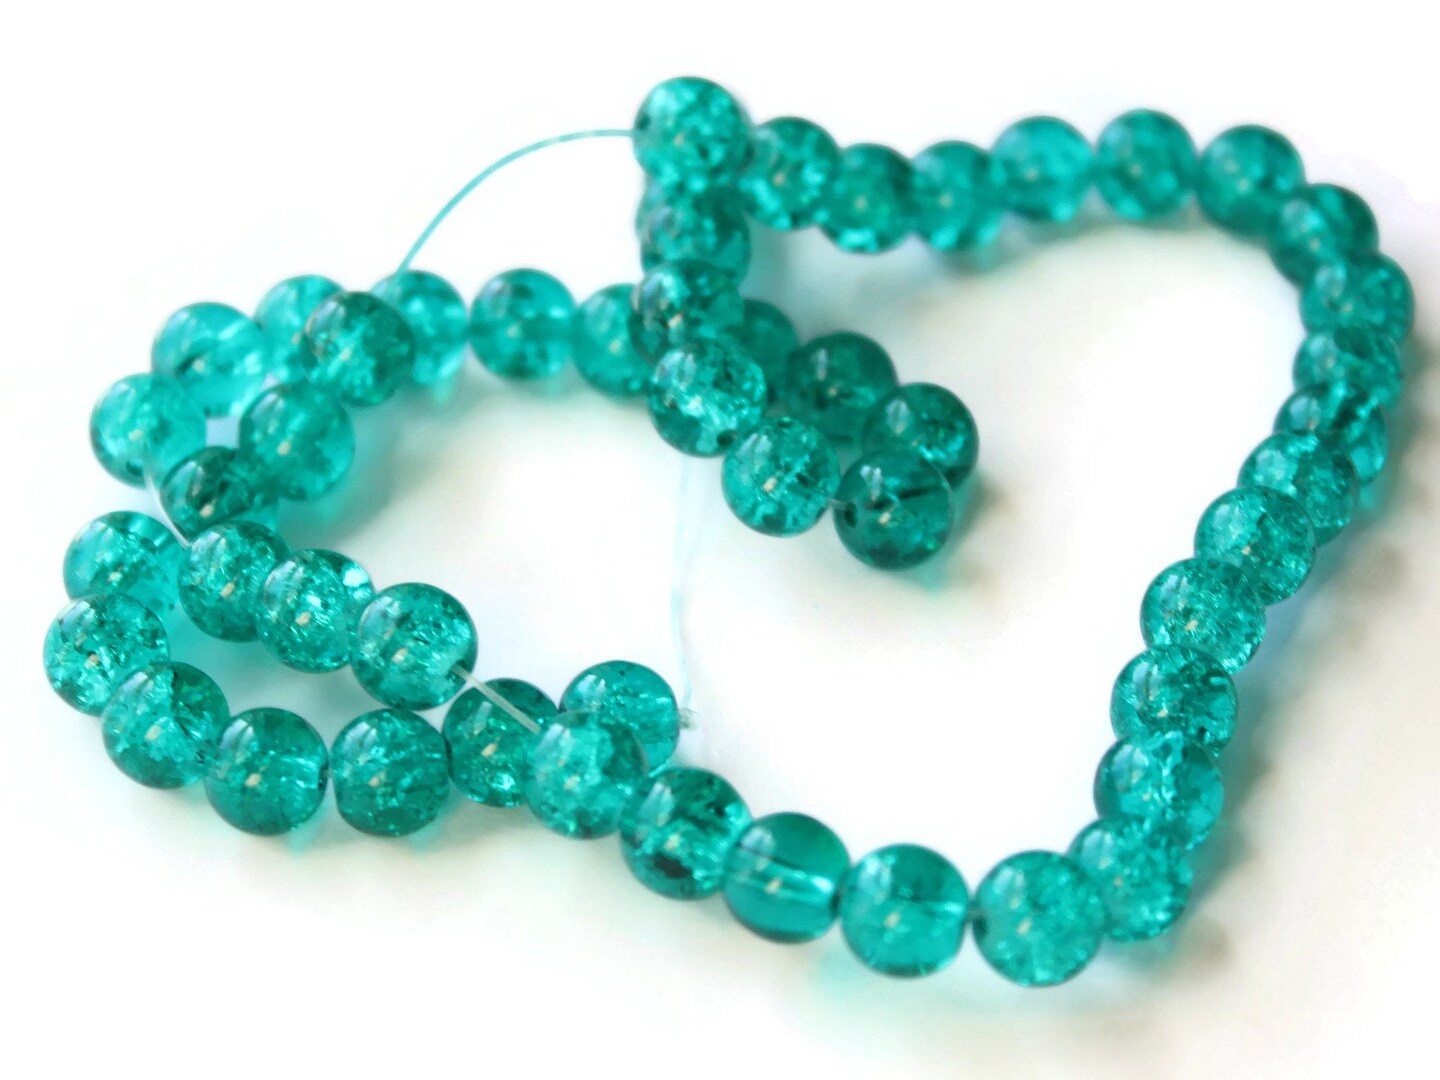 50 8mm Round Green Crackle Glass Beads